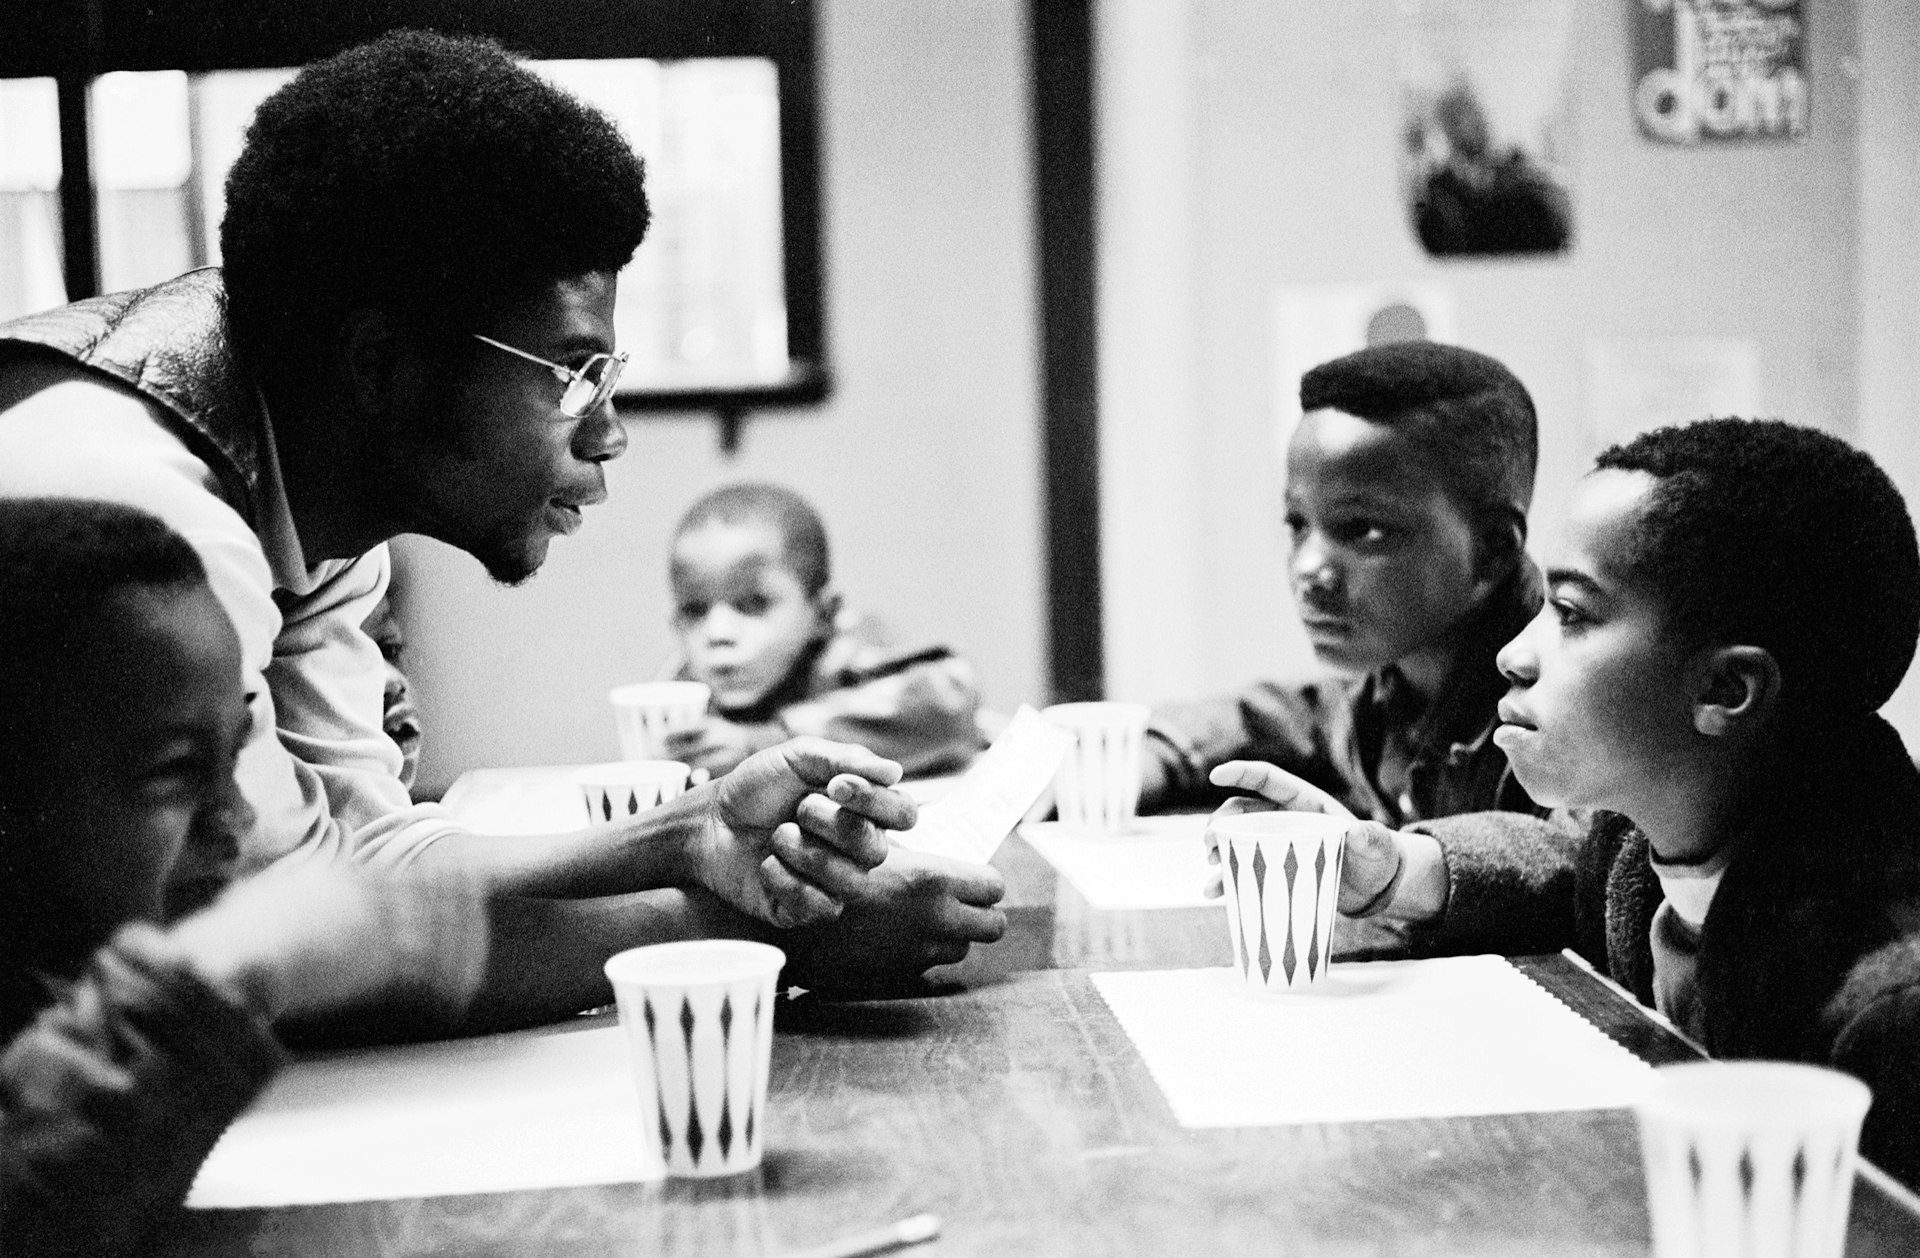 Panther Jerry “Odinka” Dunigan talks to kids while they eat breakfast on Chicago’s South Side, November 1970